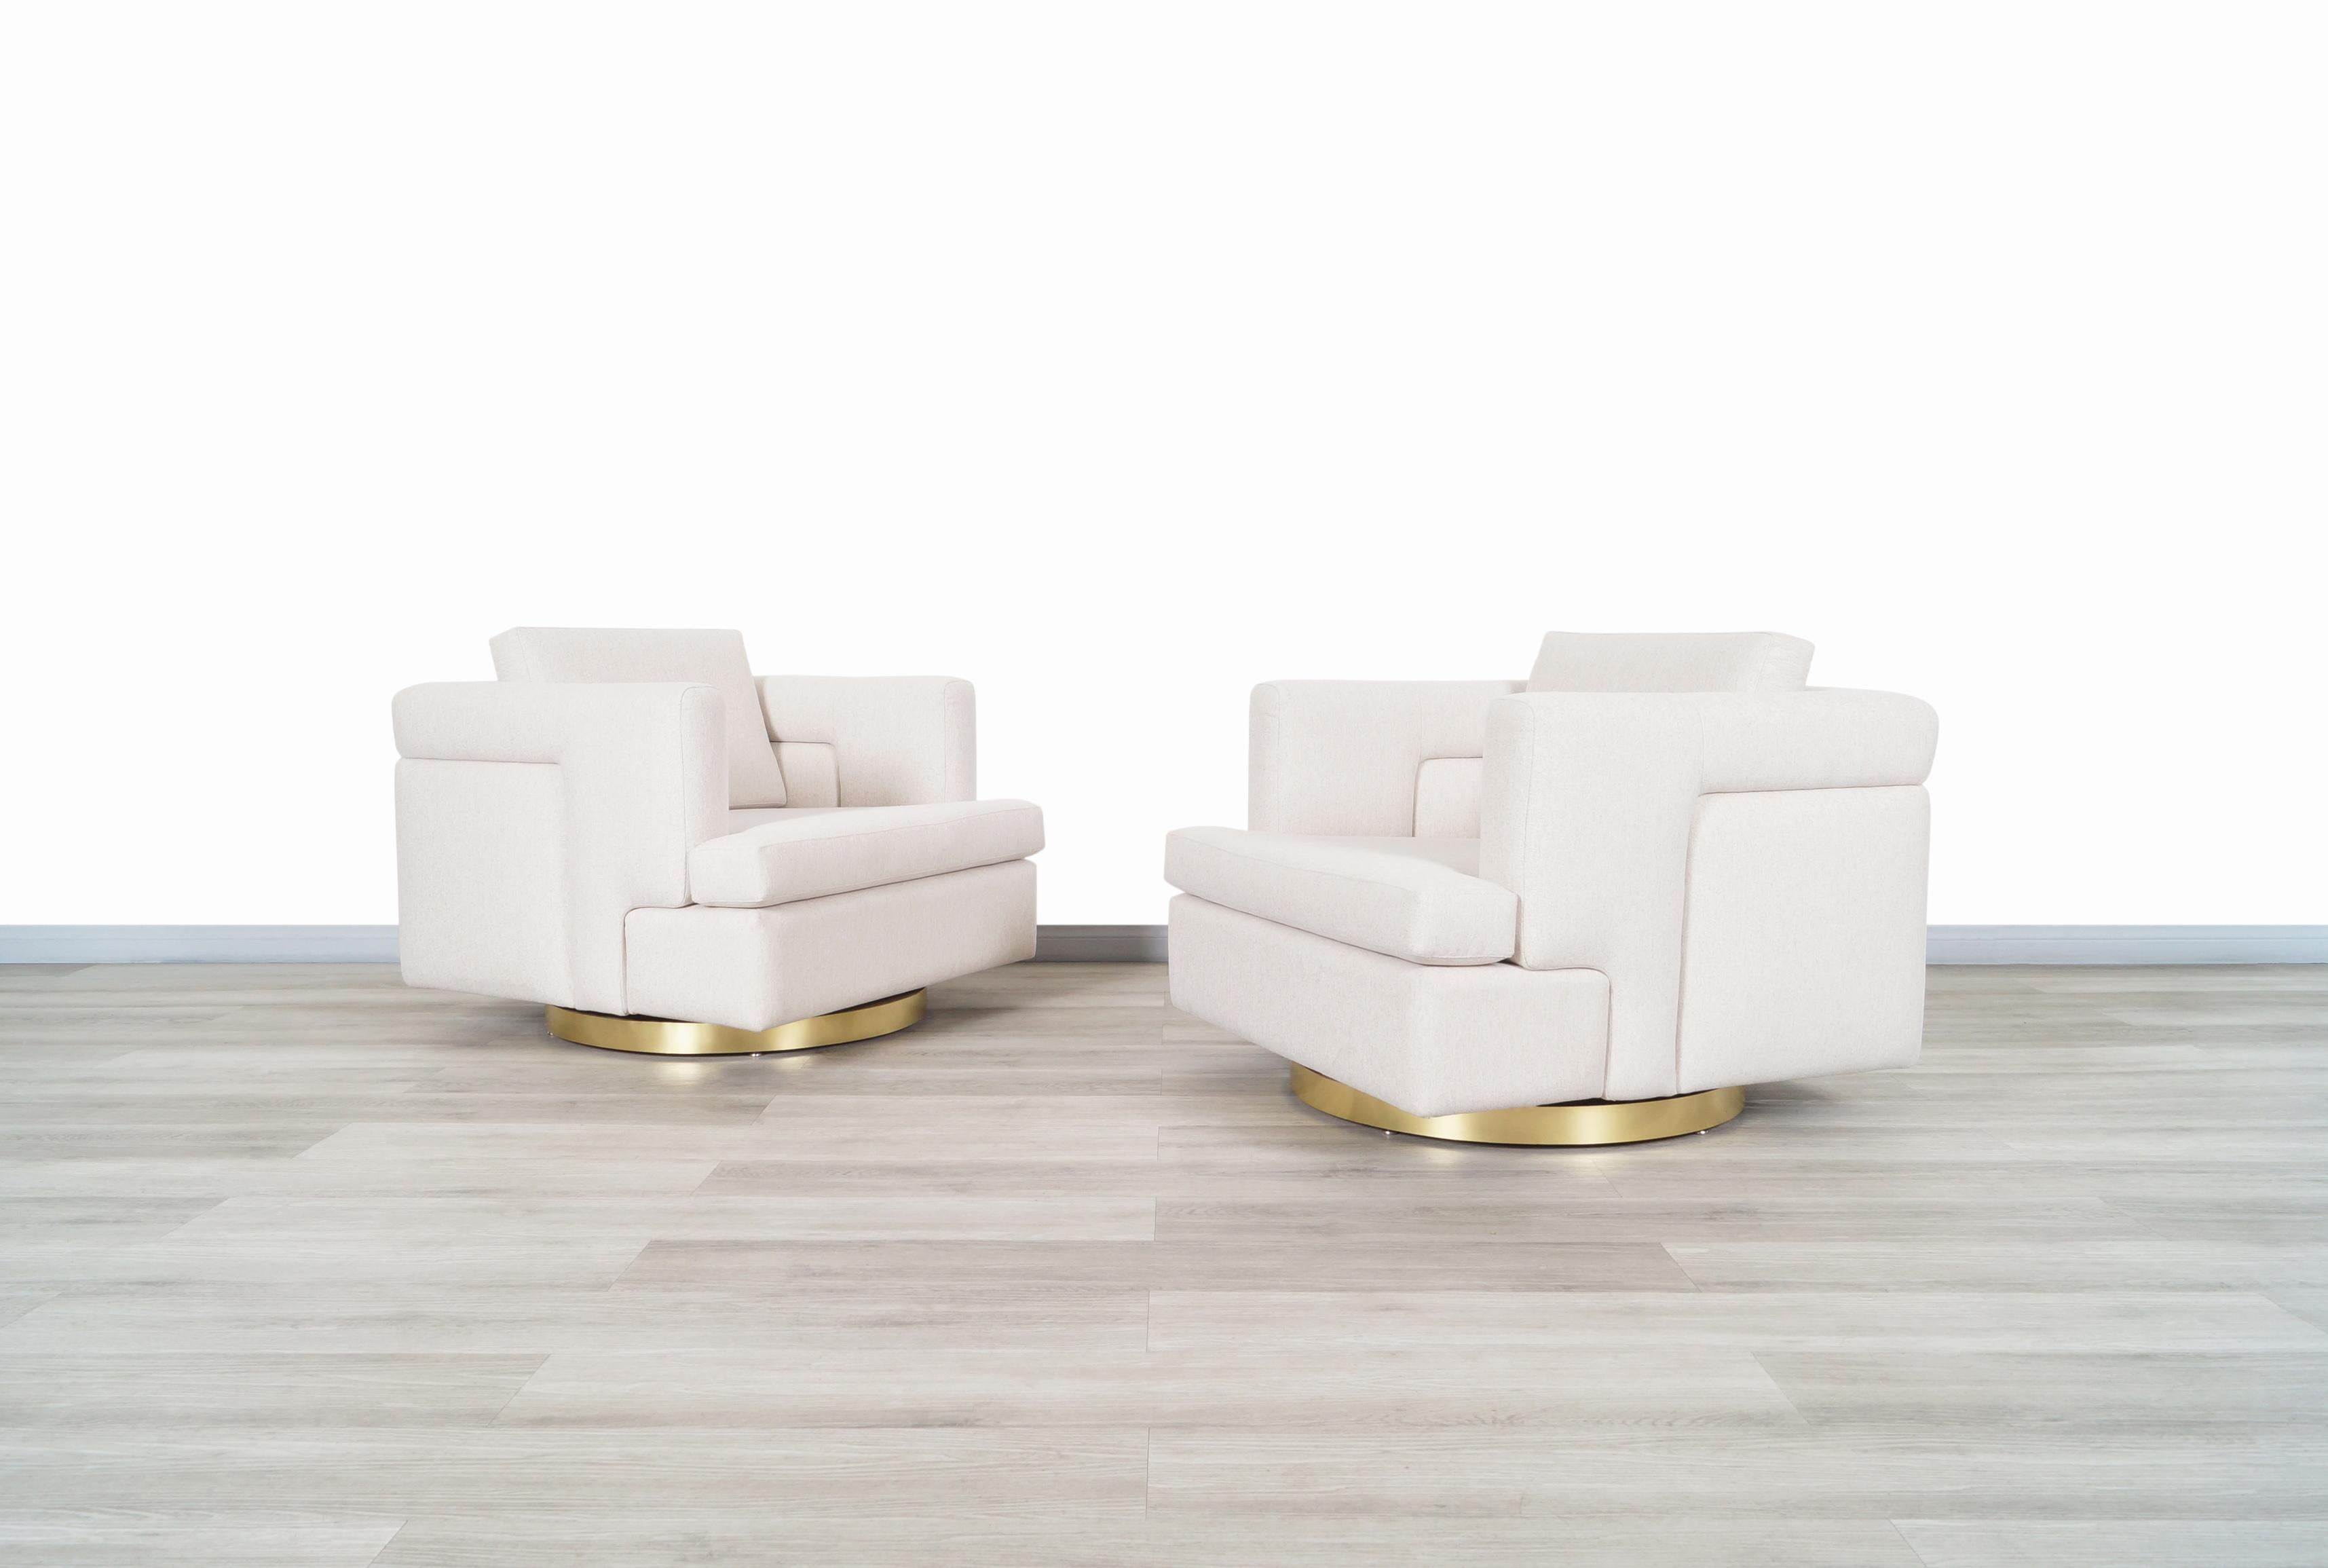 Stunning vintage brass swivel lounge chairs and ottoman designed by Hayes Furniture in Oakland, California, circa 1970s. This set is inspired by the iconic designs of the famous designer Milo Baughman, both the chairs and the ottoman have an